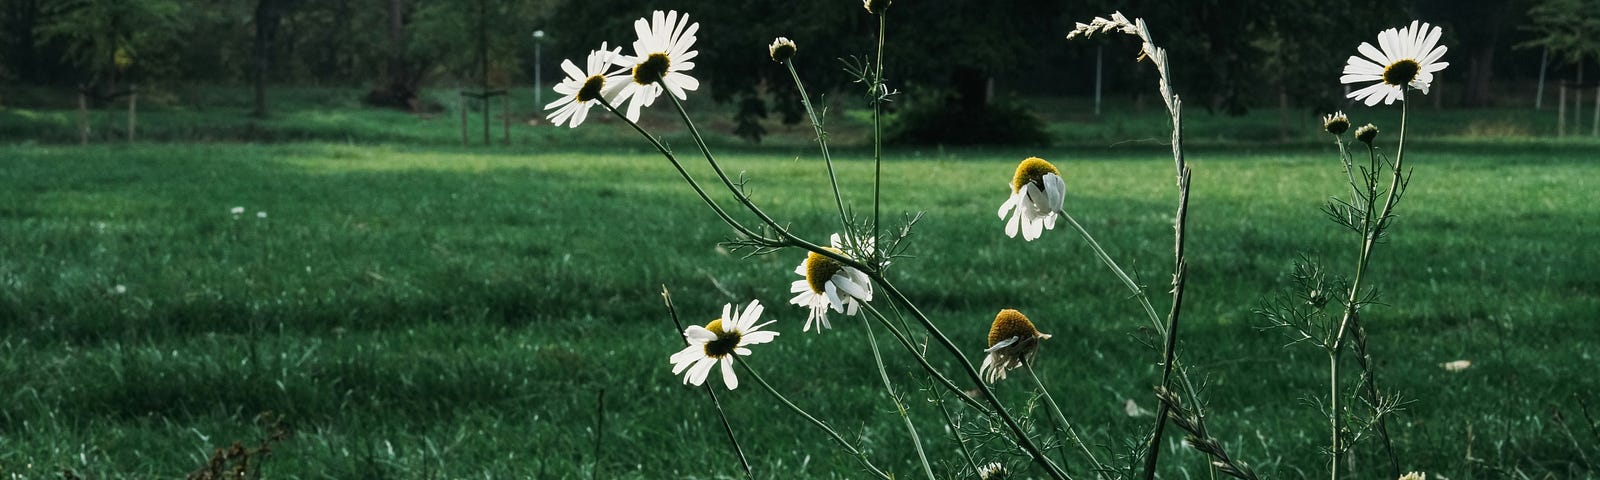 Straggly ox eye daisies growing beside a field of emerald green grass in the summer.